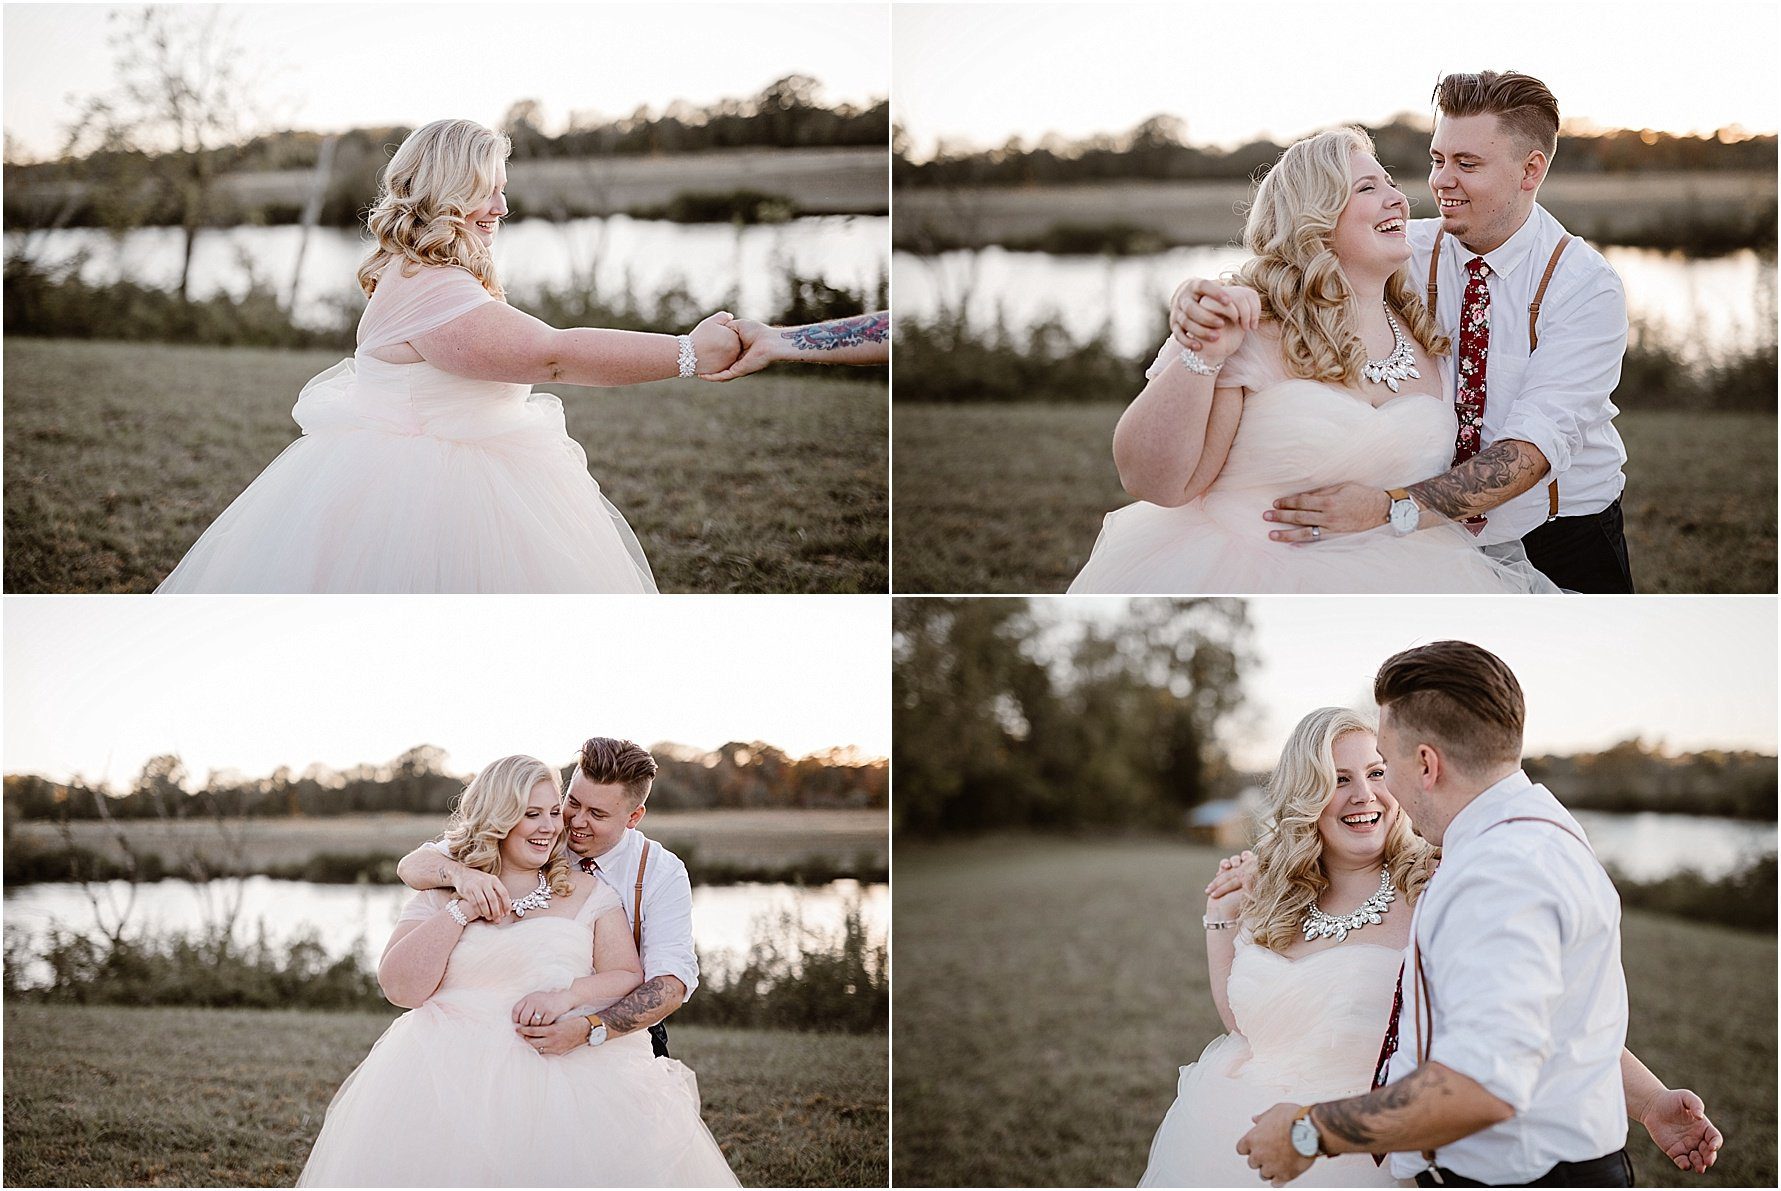 Wedding Photographers in Knoxville | Erin Morrison Photography www.erinmorrisonphotography.com